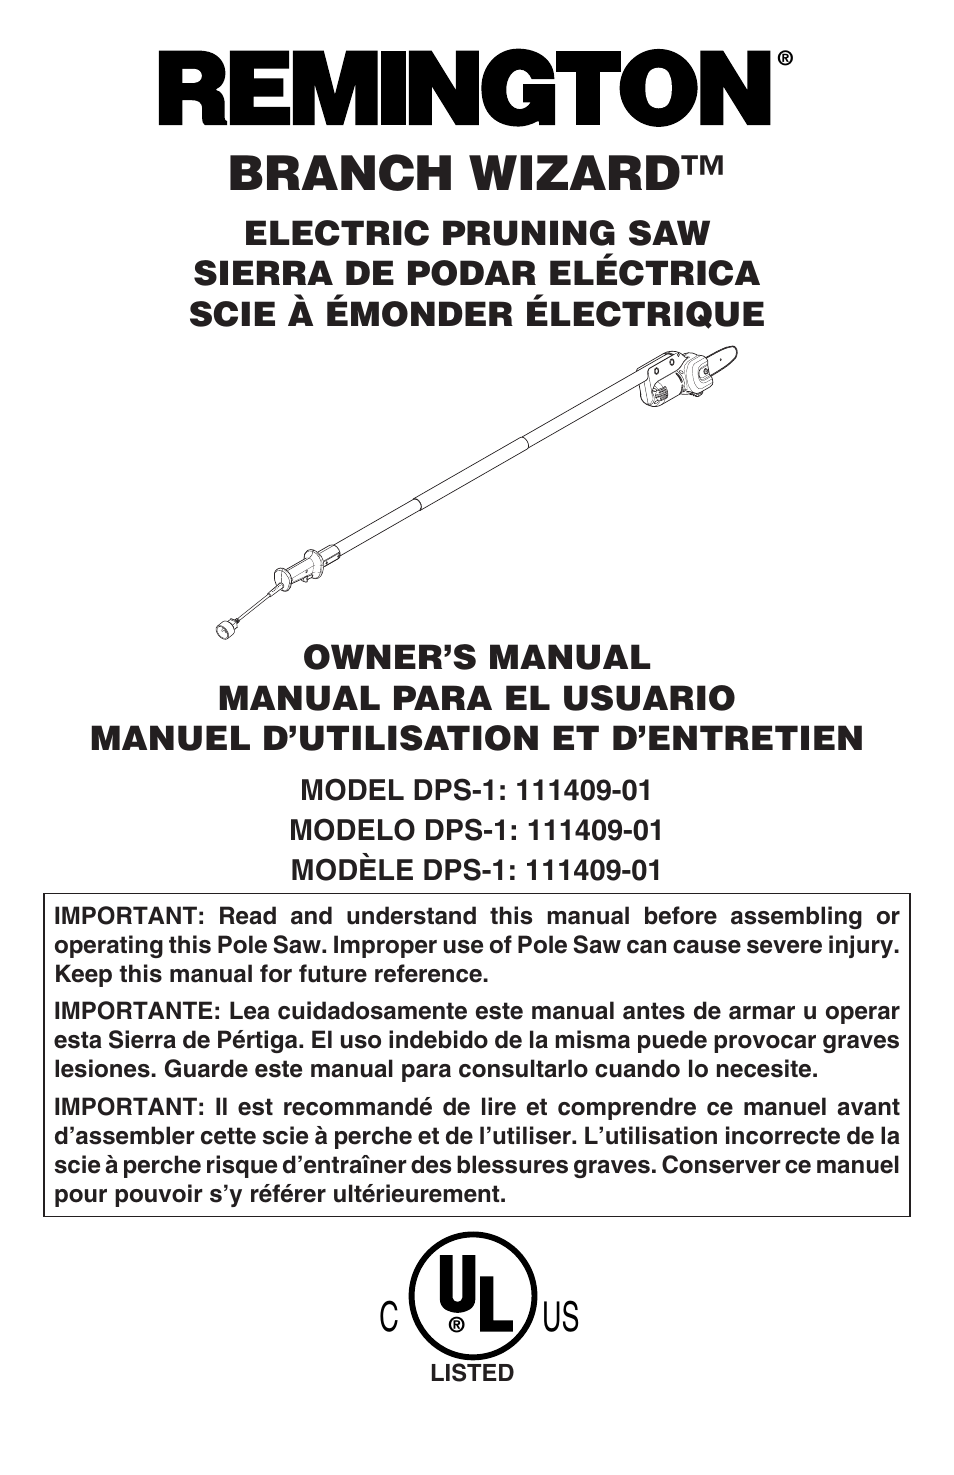 Remington Power Tools BRANCH WIZARD DPS-1: 111409-01 User Manual | 40 pages